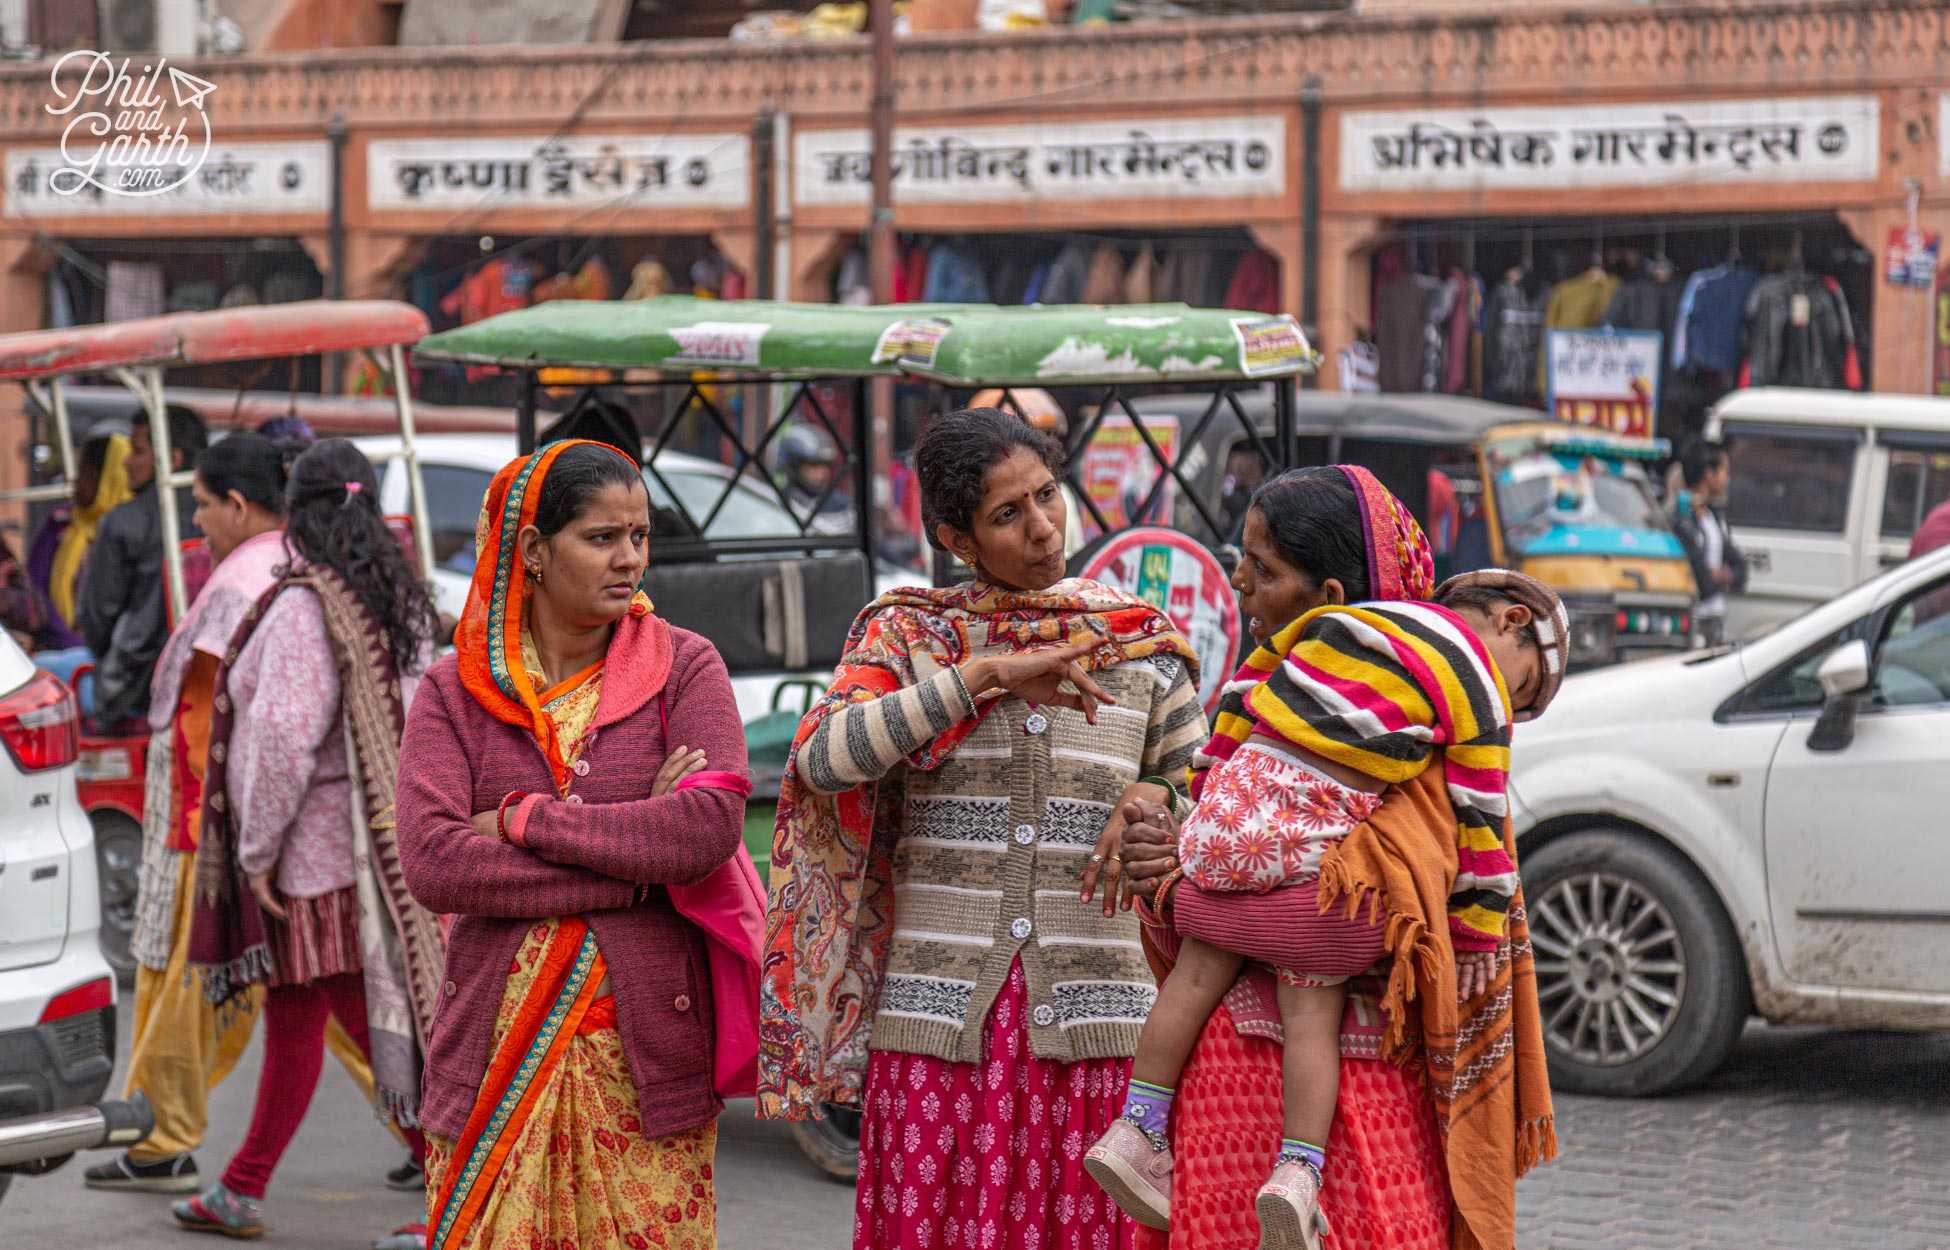 Some ladies chatting on the streets of Jaipur